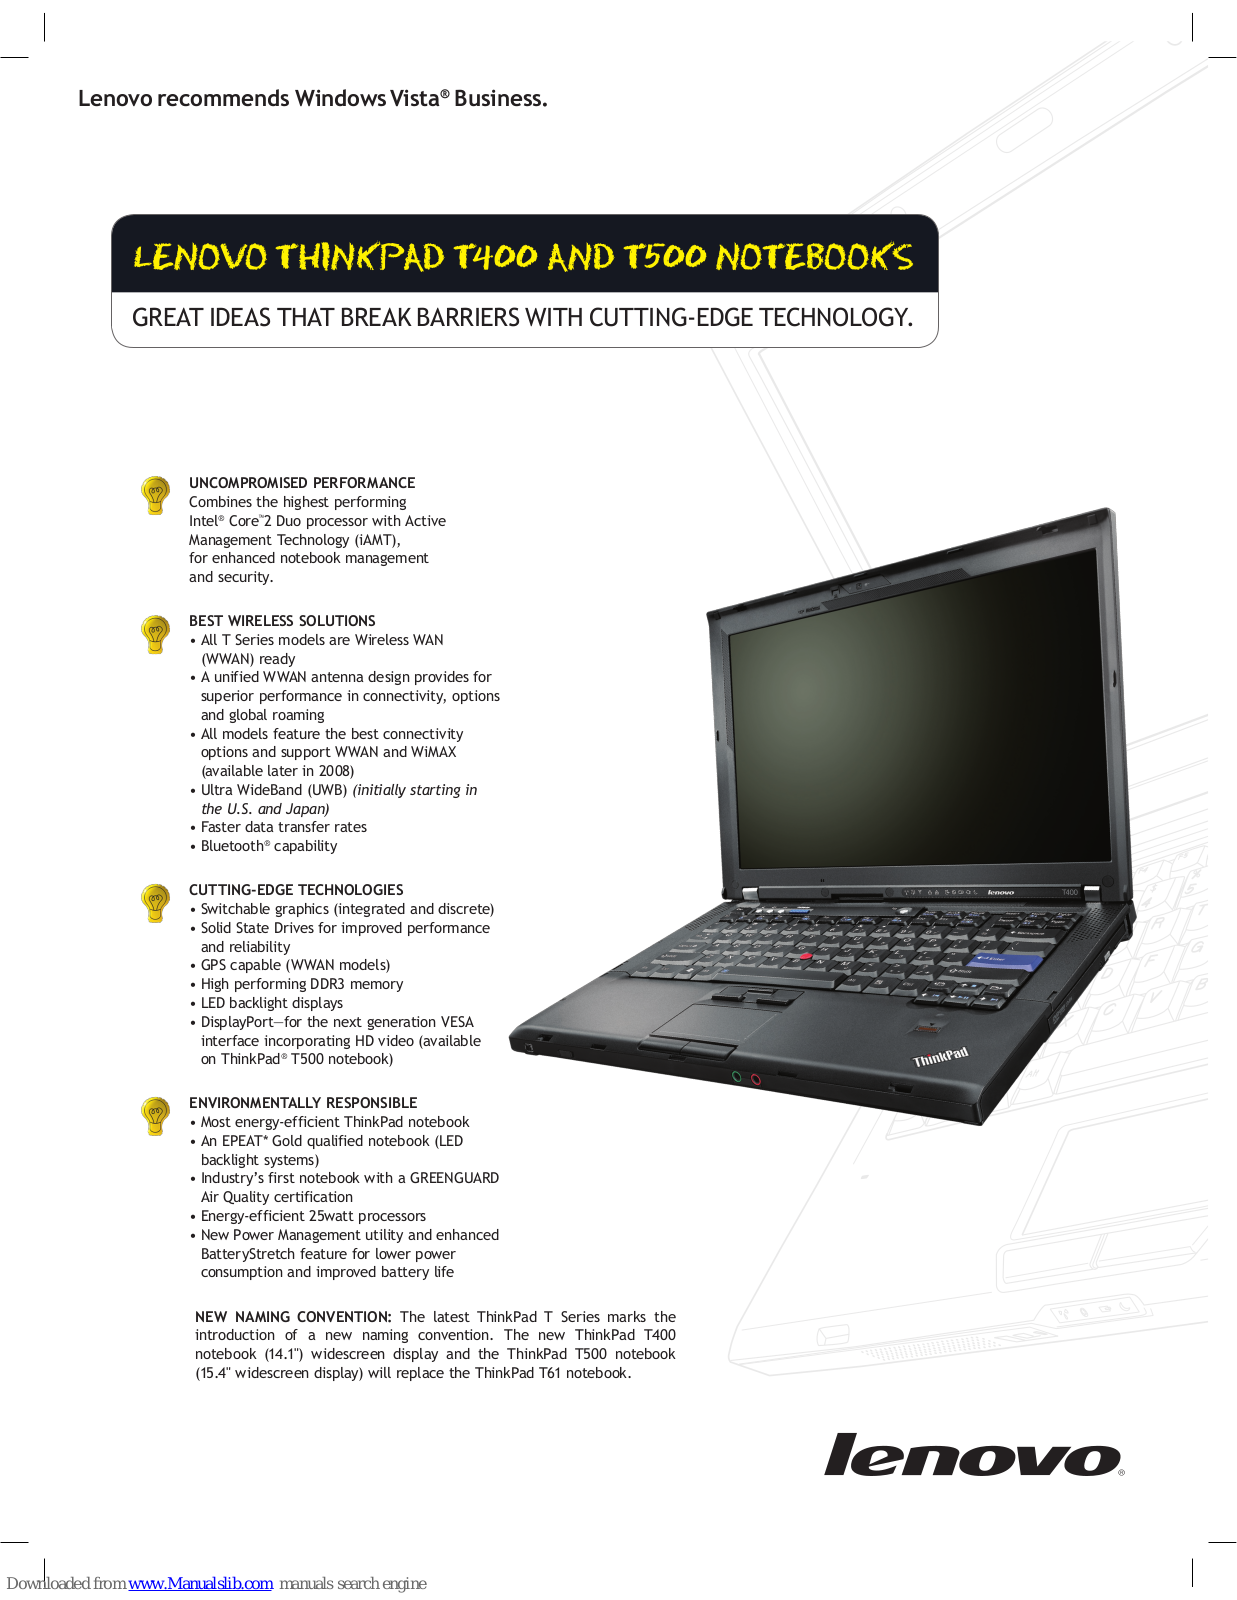 Lenovo ThinkPad T400 2765, ThinkPad T400 2773, ThinkPad T400 2768, ThinkPad T400 2769, ThinkPad T400 6473 Specifications